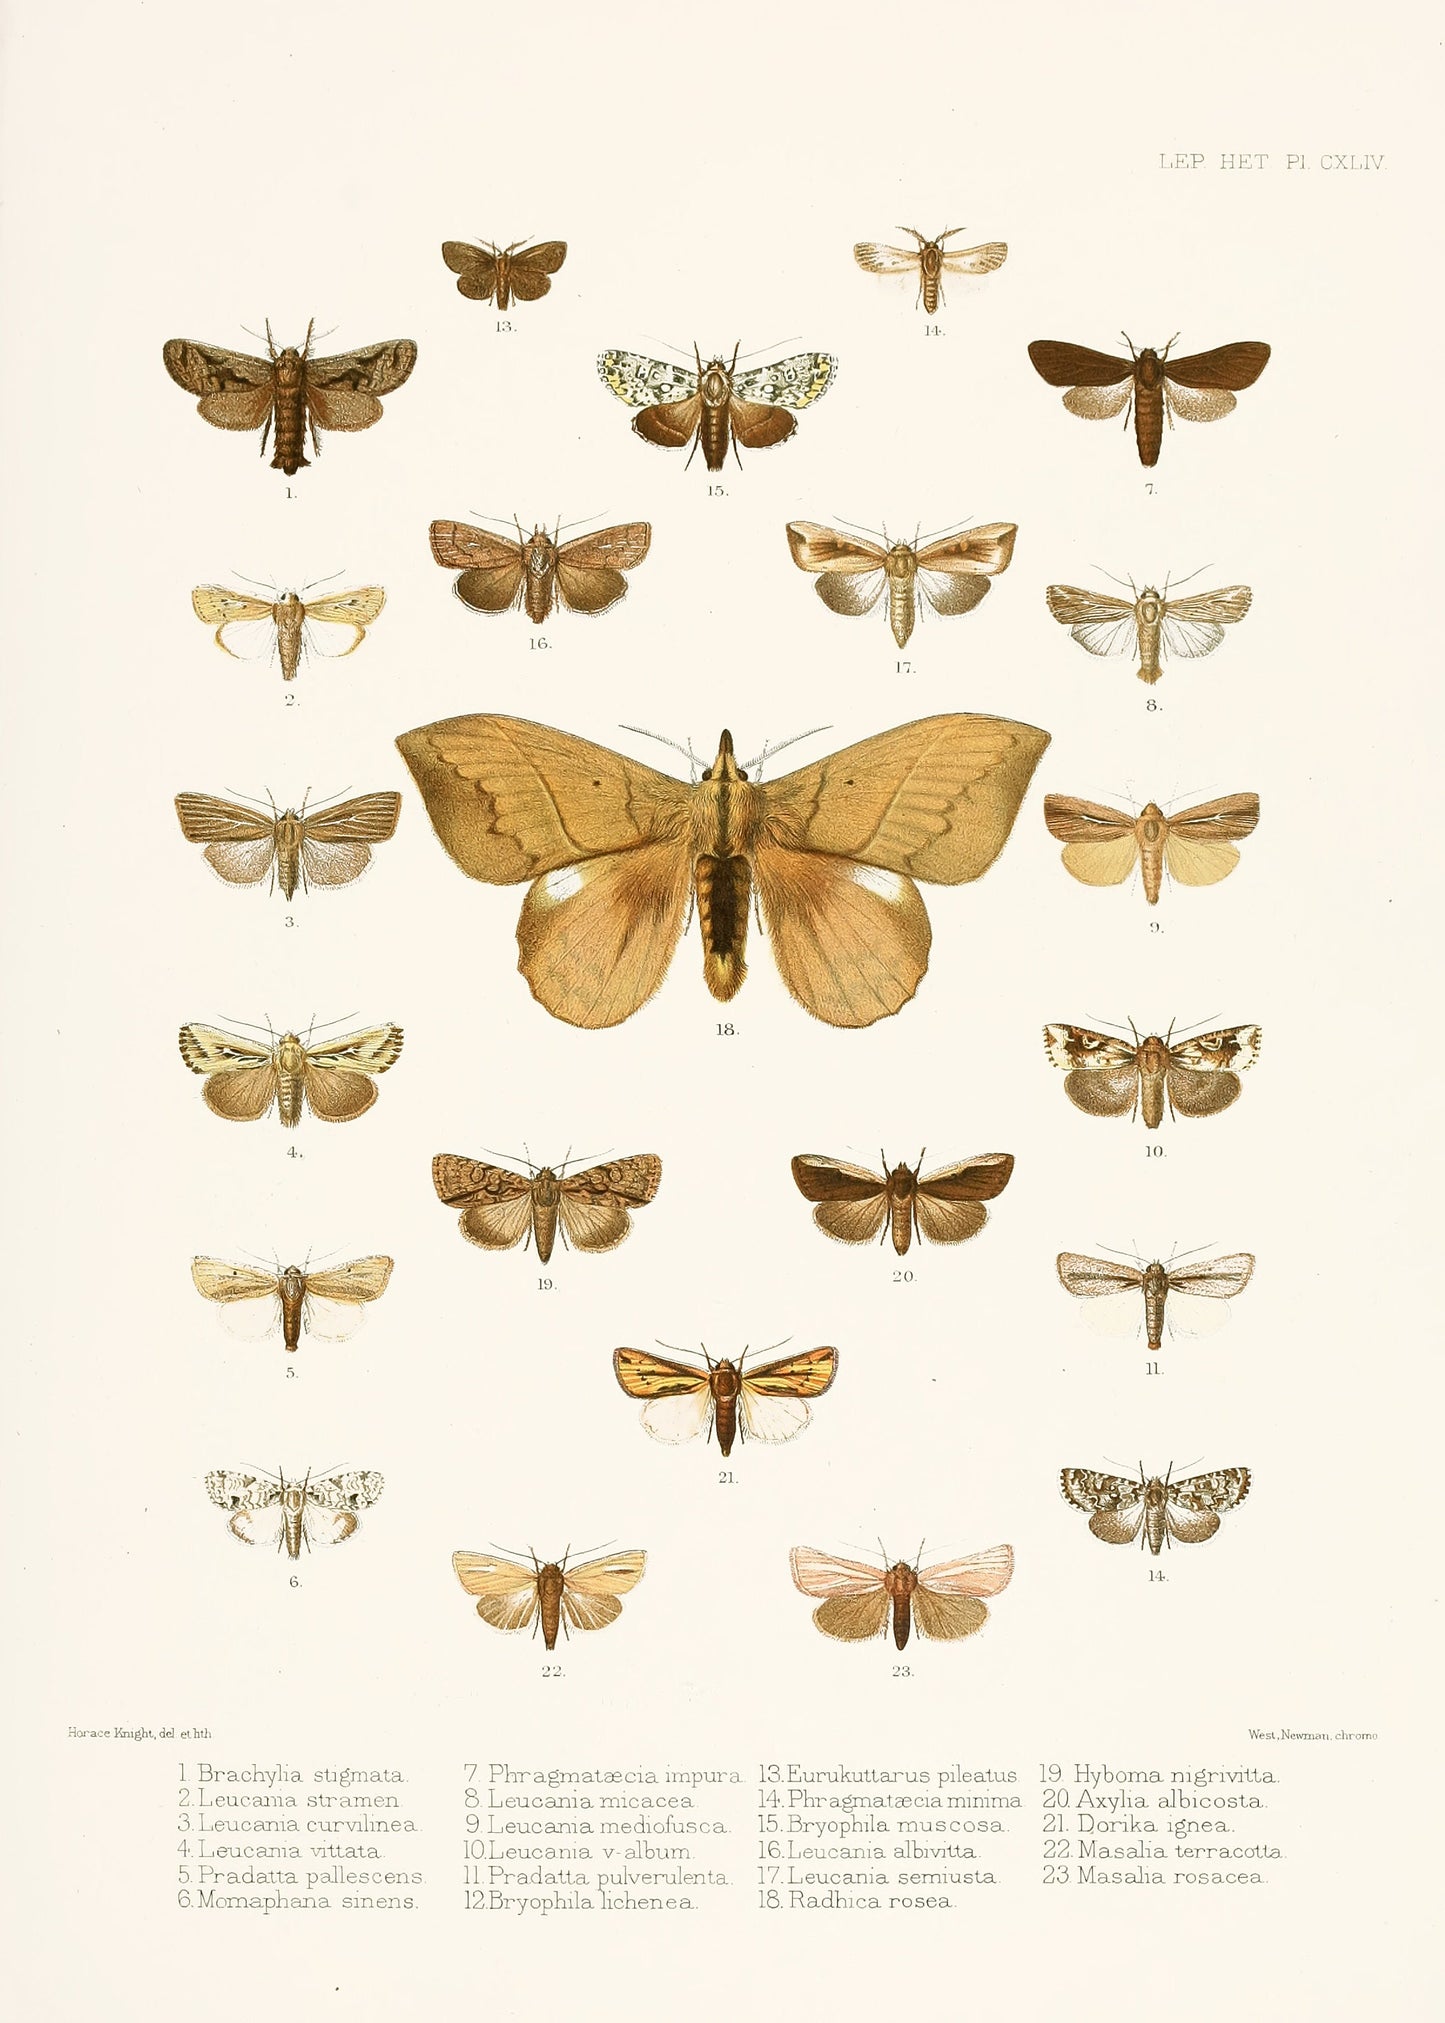 Illustrations of Typical Species of Lepidoptera [18 Images]